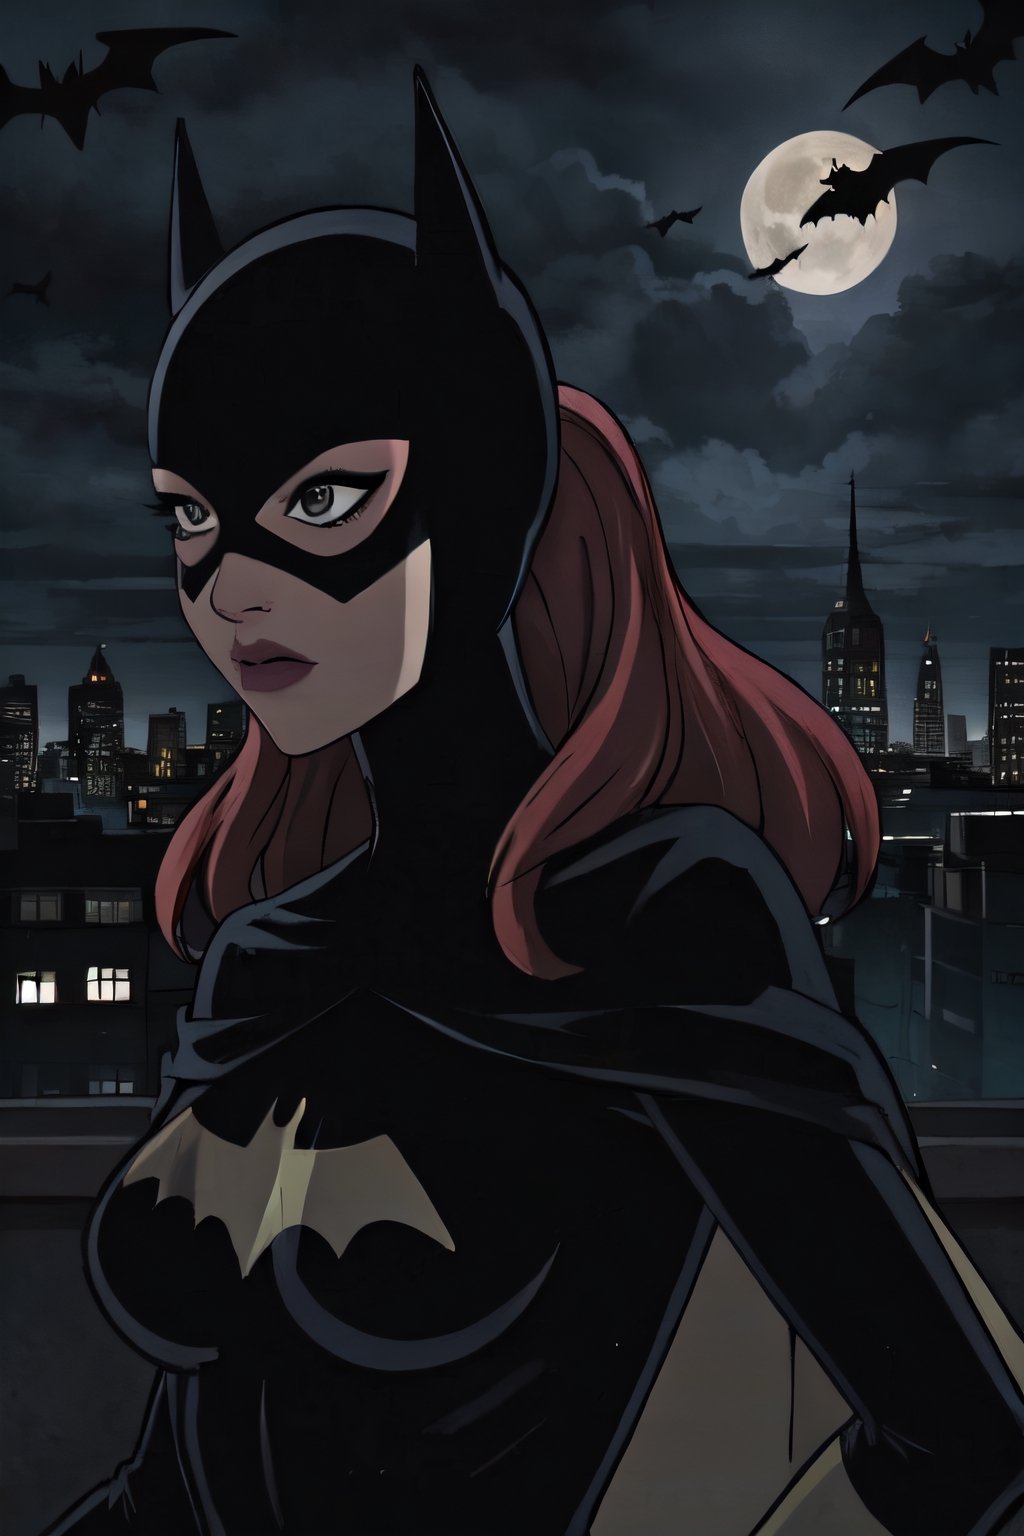 Batgirl, facial portrait, sexy stare,  on top of building, city below, cloudy sky, lightning, full moon, bats flying, 